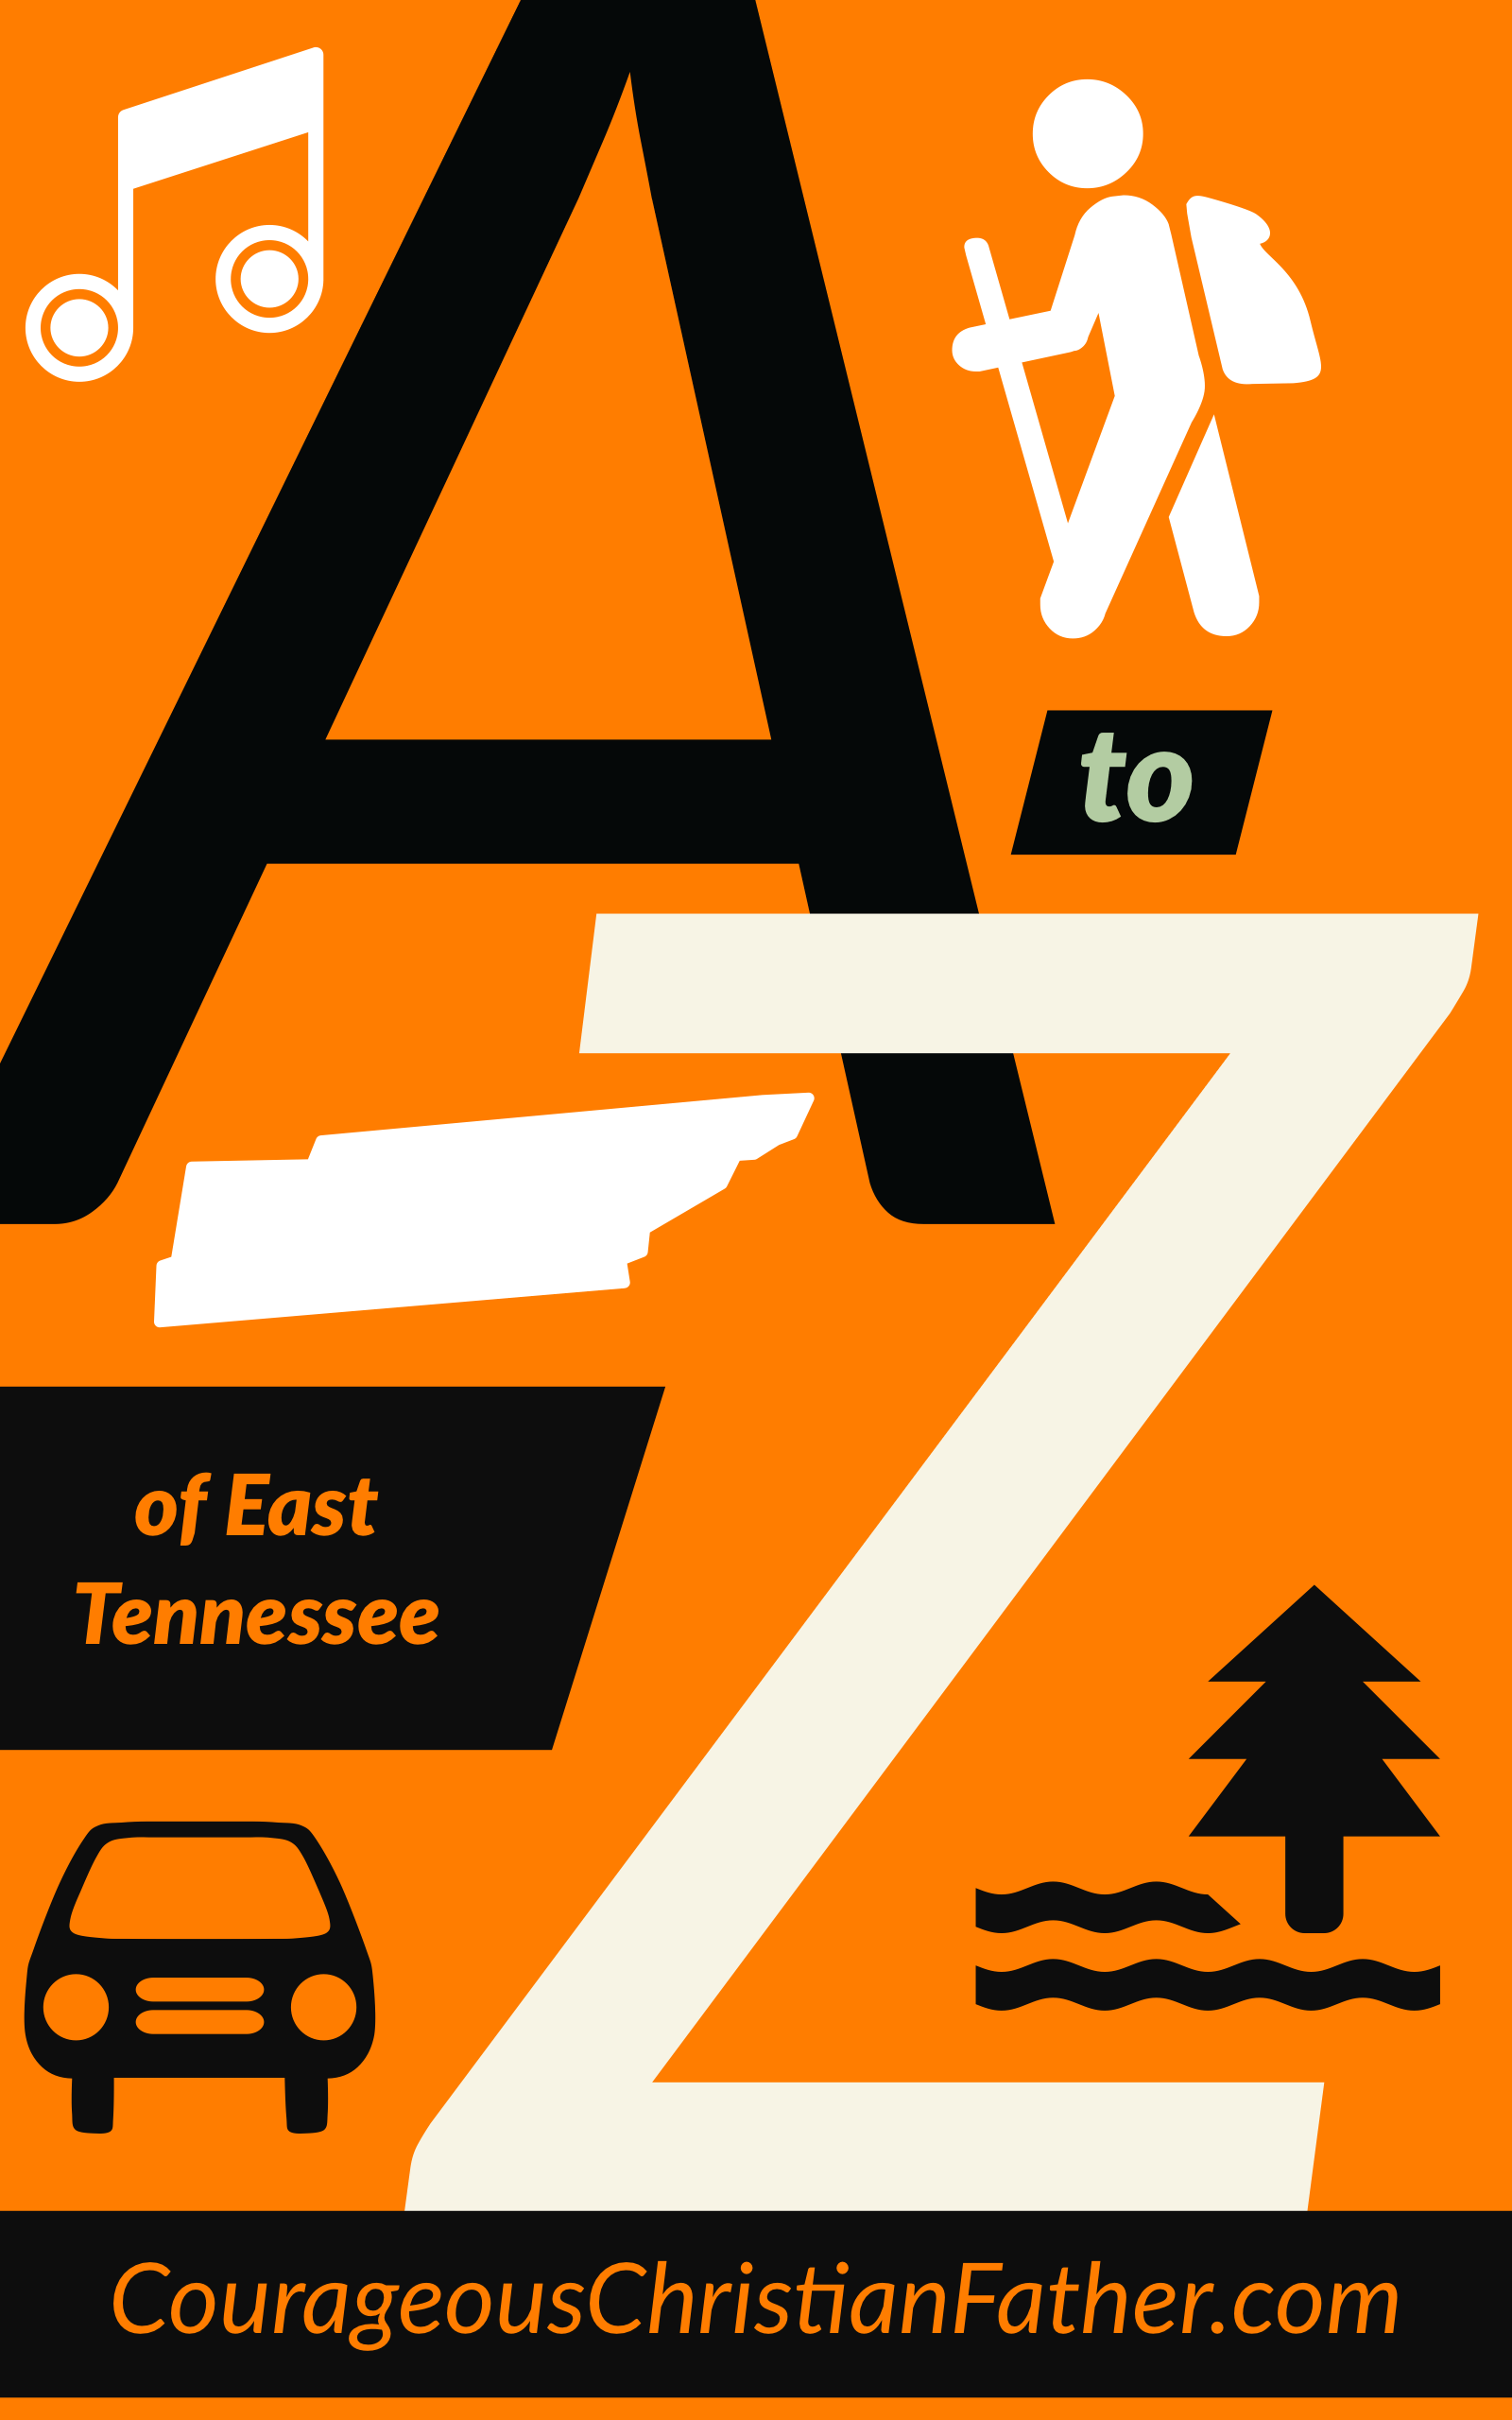 The A-Z of East Tennessee - I made a list of things about East Tennessee using the alphabet starting from A and ending in Z. #EastTennessee